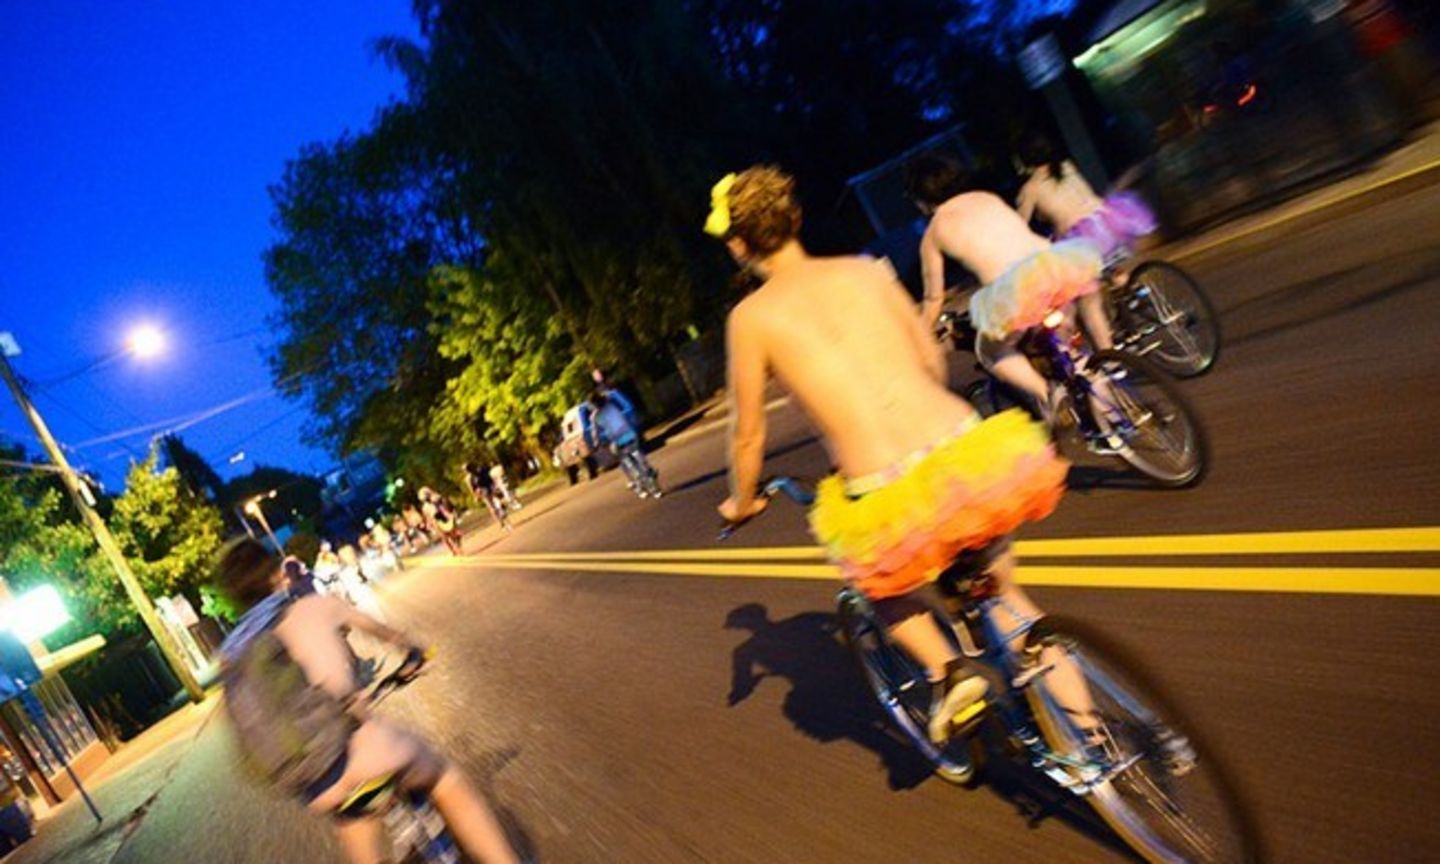 Natural Nudist Girls Groups Naked - Portland's World Naked Bike Ride | The Official Guide to Portland